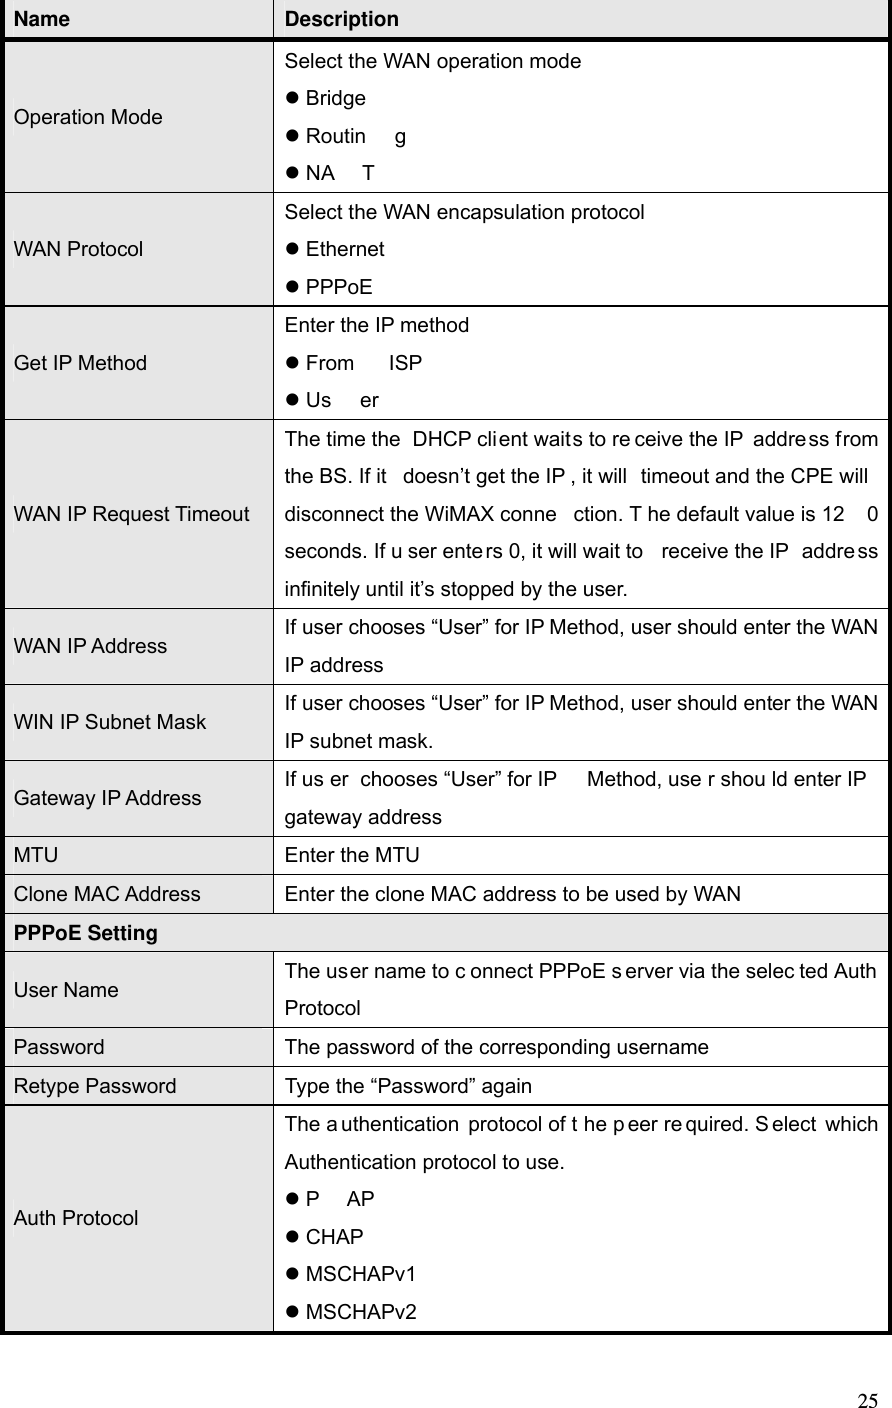  25 Name  Description Operation Mode Select the WAN operation mode  Bridge  Routin g  NA T WAN Protocol Select the WAN encapsulation protocol  Ethernet  PPPoE Get IP Method Enter the IP method  From ISP  Us er WAN IP Request Timeout The time the  DHCP client waits to re ceive the IP  address from the BS. If it  doesn’t get the IP , it will  timeout and the CPE will  disconnect the WiMAX conne ction. T he default value is 12 0 seconds. If u ser ente rs 0, it will wait to  receive the IP  addre ss infinitely until it’s stopped by the user. WAN IP Address  If user chooses “User” for IP Method, user should enter the WAN IP address WIN IP Subnet Mask  If user chooses “User” for IP Method, user should enter the WAN IP subnet mask. Gateway IP Address  If us er chooses “User” for IP  Method, use r shou ld enter IP  gateway address MTU  Enter the MTU Clone MAC Address  Enter the clone MAC address to be used by WAN PPPoE Setting User Name  The user name to c onnect PPPoE s erver via the selec ted Auth Protocol Password  The password of the corresponding username Retype Password  Type the “Password” again Auth Protocol The a uthentication protocol of t he p eer re quired. S elect which Authentication protocol to use.  P AP  CHAP  MSCHAPv1  MSCHAPv2 